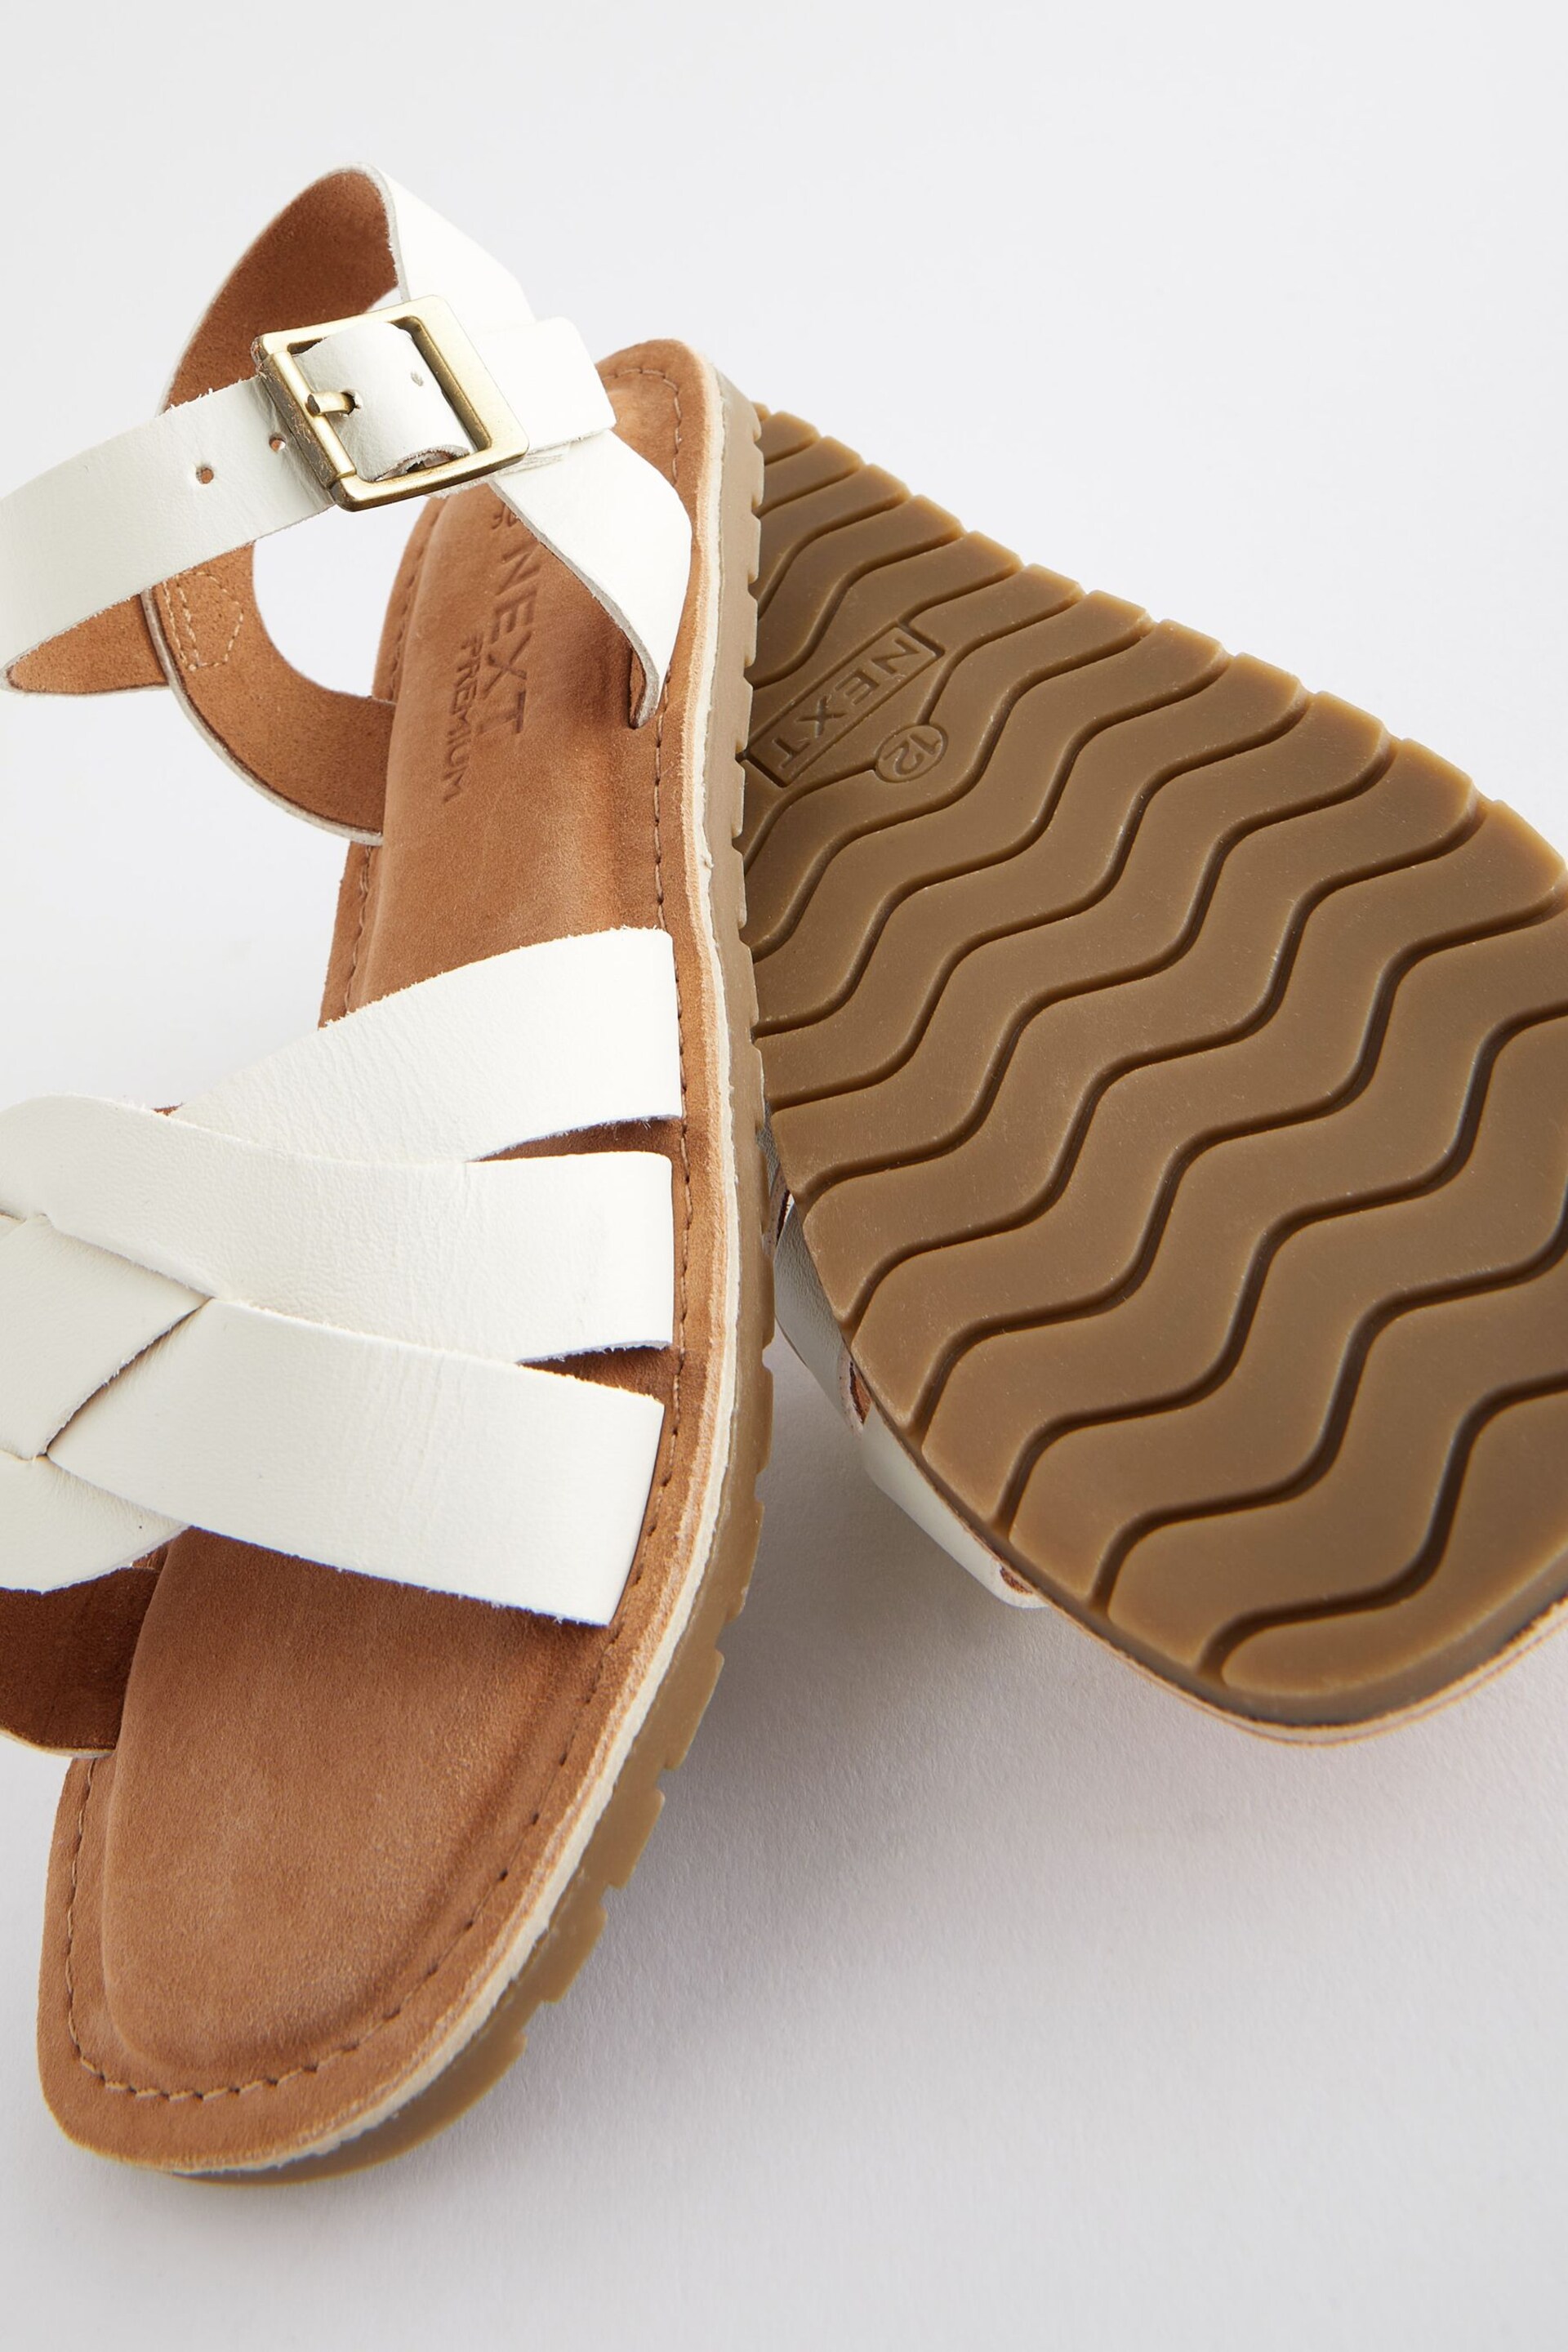 White Wide Fit (G) Leather Woven Sandals - Image 4 of 5